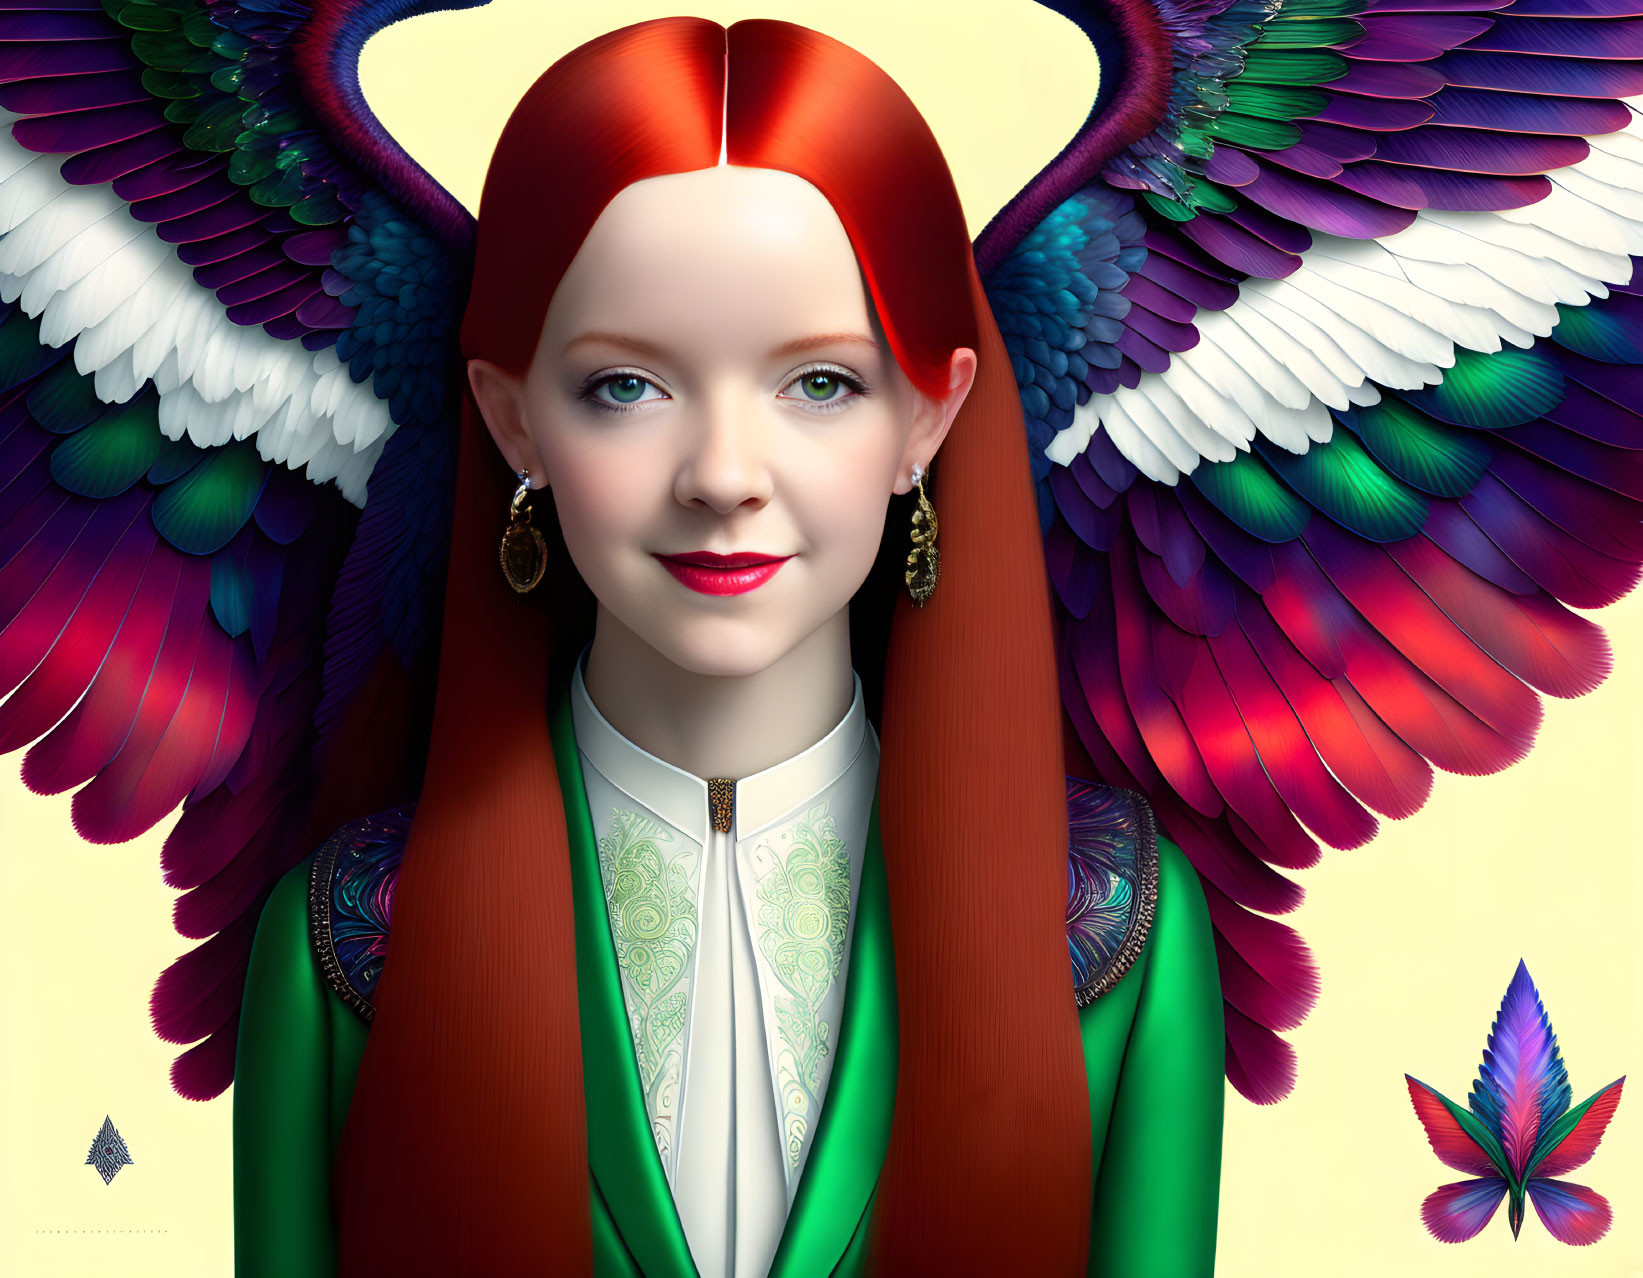 Red-haired woman with green eyes and serene expression surrounded by colorful wing-like patterns and a vibrant butterfly.